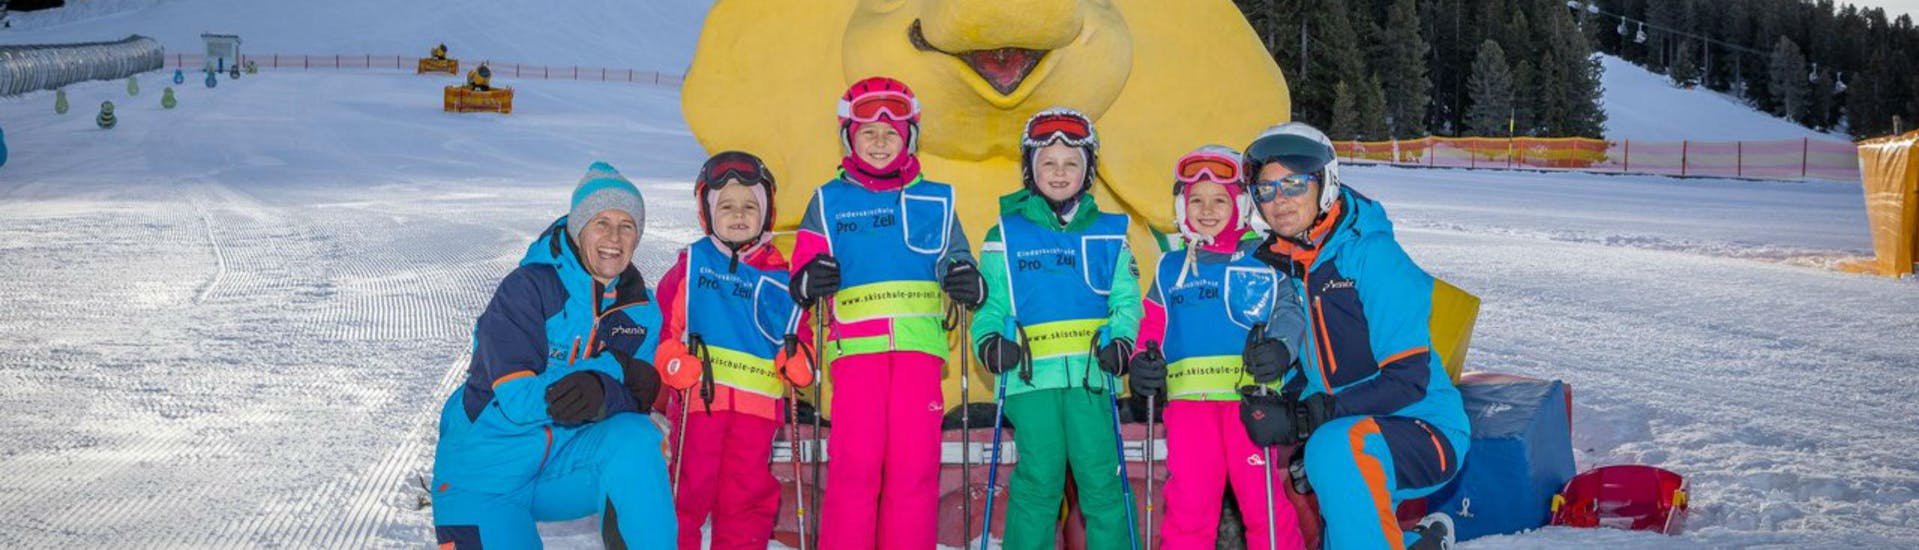 A group of children and their two ski instructors from the ski school Skischule Pro Zell in Zell am Ziller are posing for a photo in the Kinderland area during their Kids Ski Lessons (from 6 years) - Beginners.